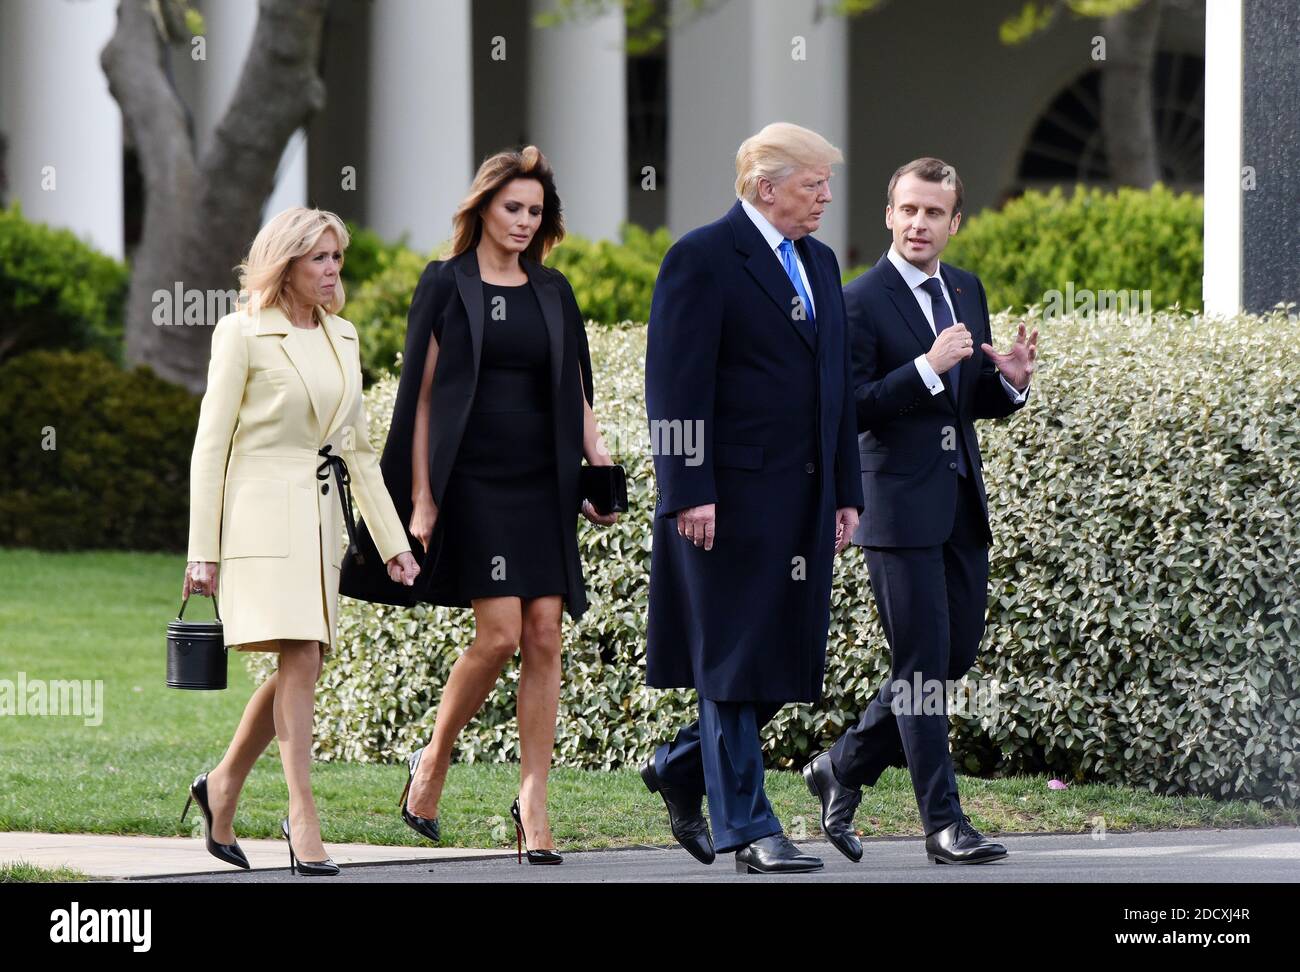 U.S President Donald Trump and First Lady Melania Trump join French President Emmanuel Macron and his wife Brigitte Macron to plant on the South Lawn of the White House a tree that the Macrons provided as a gift, a European Sessile Oak April 23, 2018 in Washington D.C . Photo by Olivier Douliery/ABACAPPRESS.COM Stock Photo